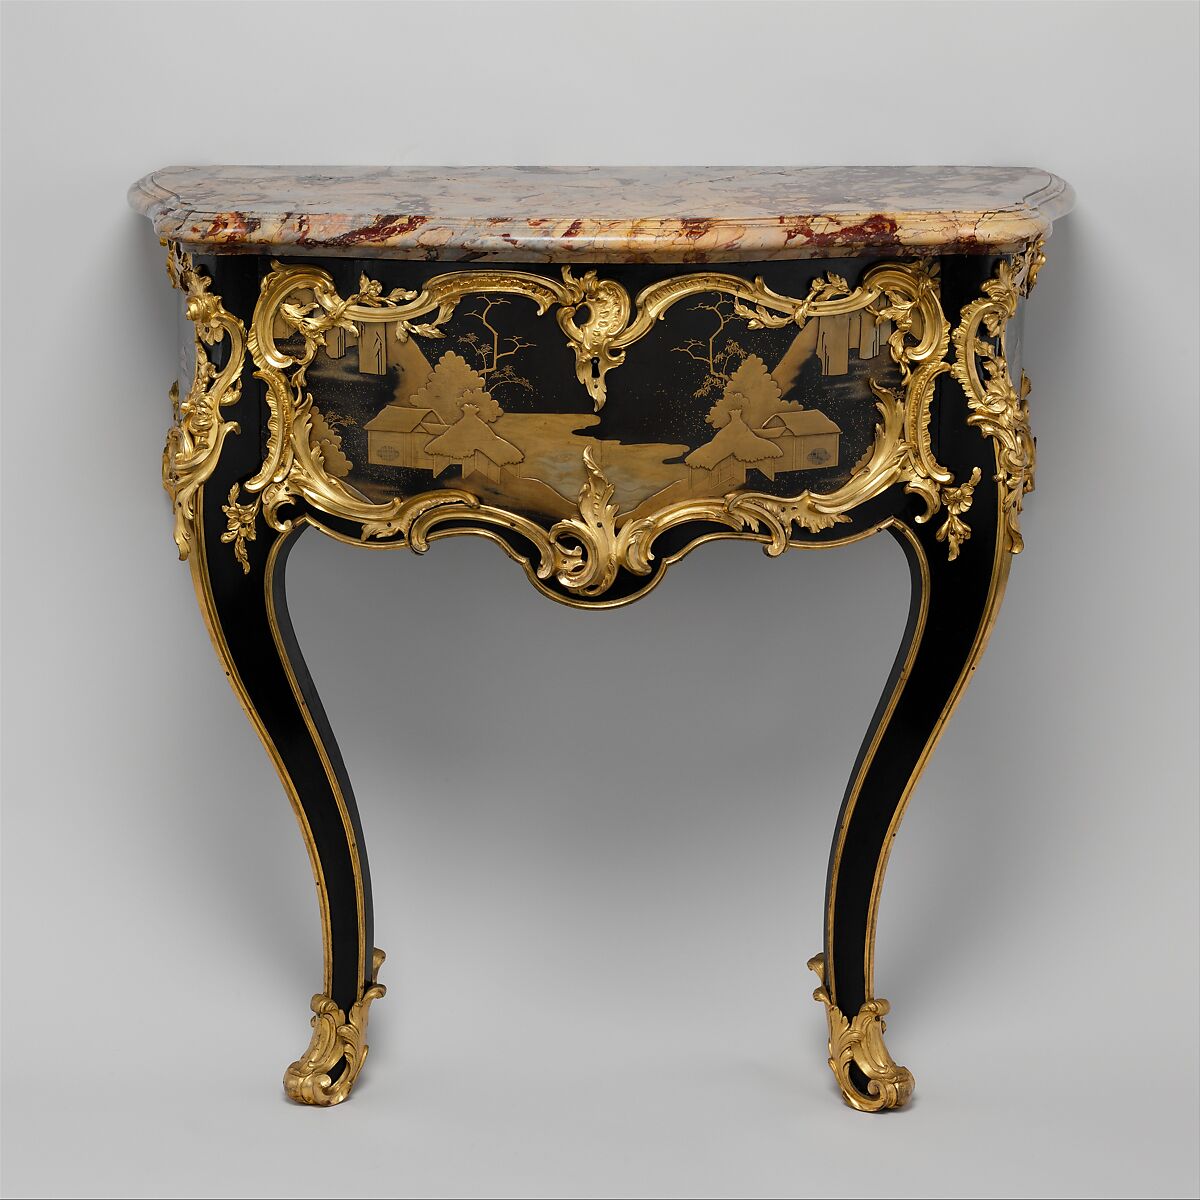 Side table (commode en console), Bernard II van Risenburgh (ca. 1696–ca. 1767), Oak and pine lacquered black and veneered with Japanese black and gold lacquer; gilt-bronze mounts; Sarrancolin marble top, French, Paris 